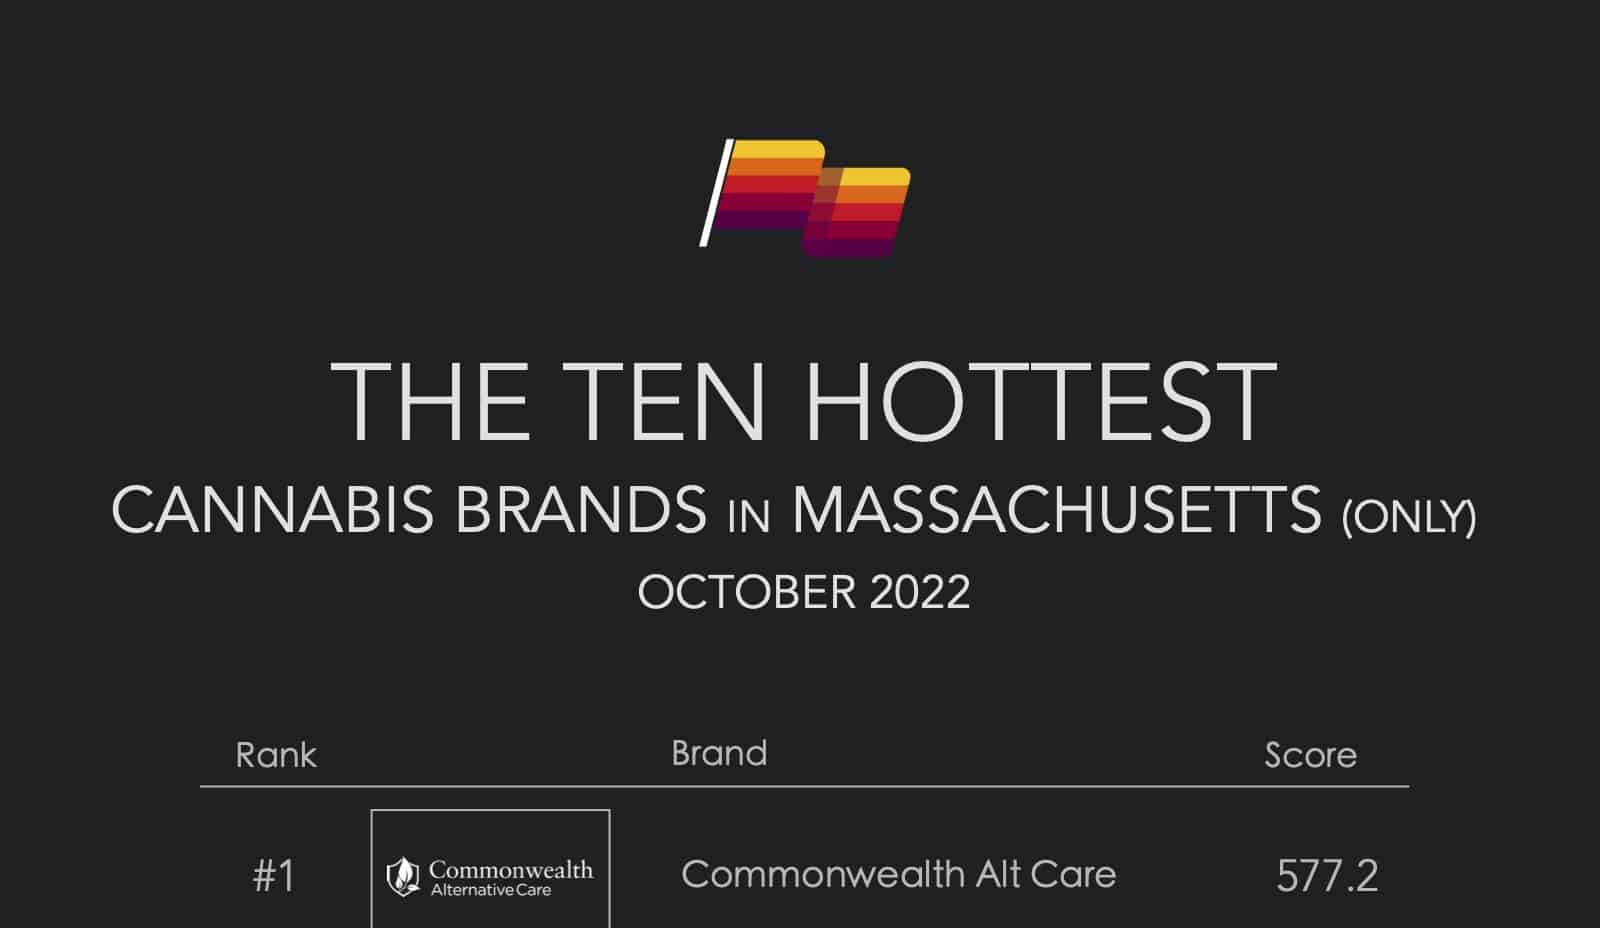 The 10 Hottest Cannabis Brands in Massachusetts